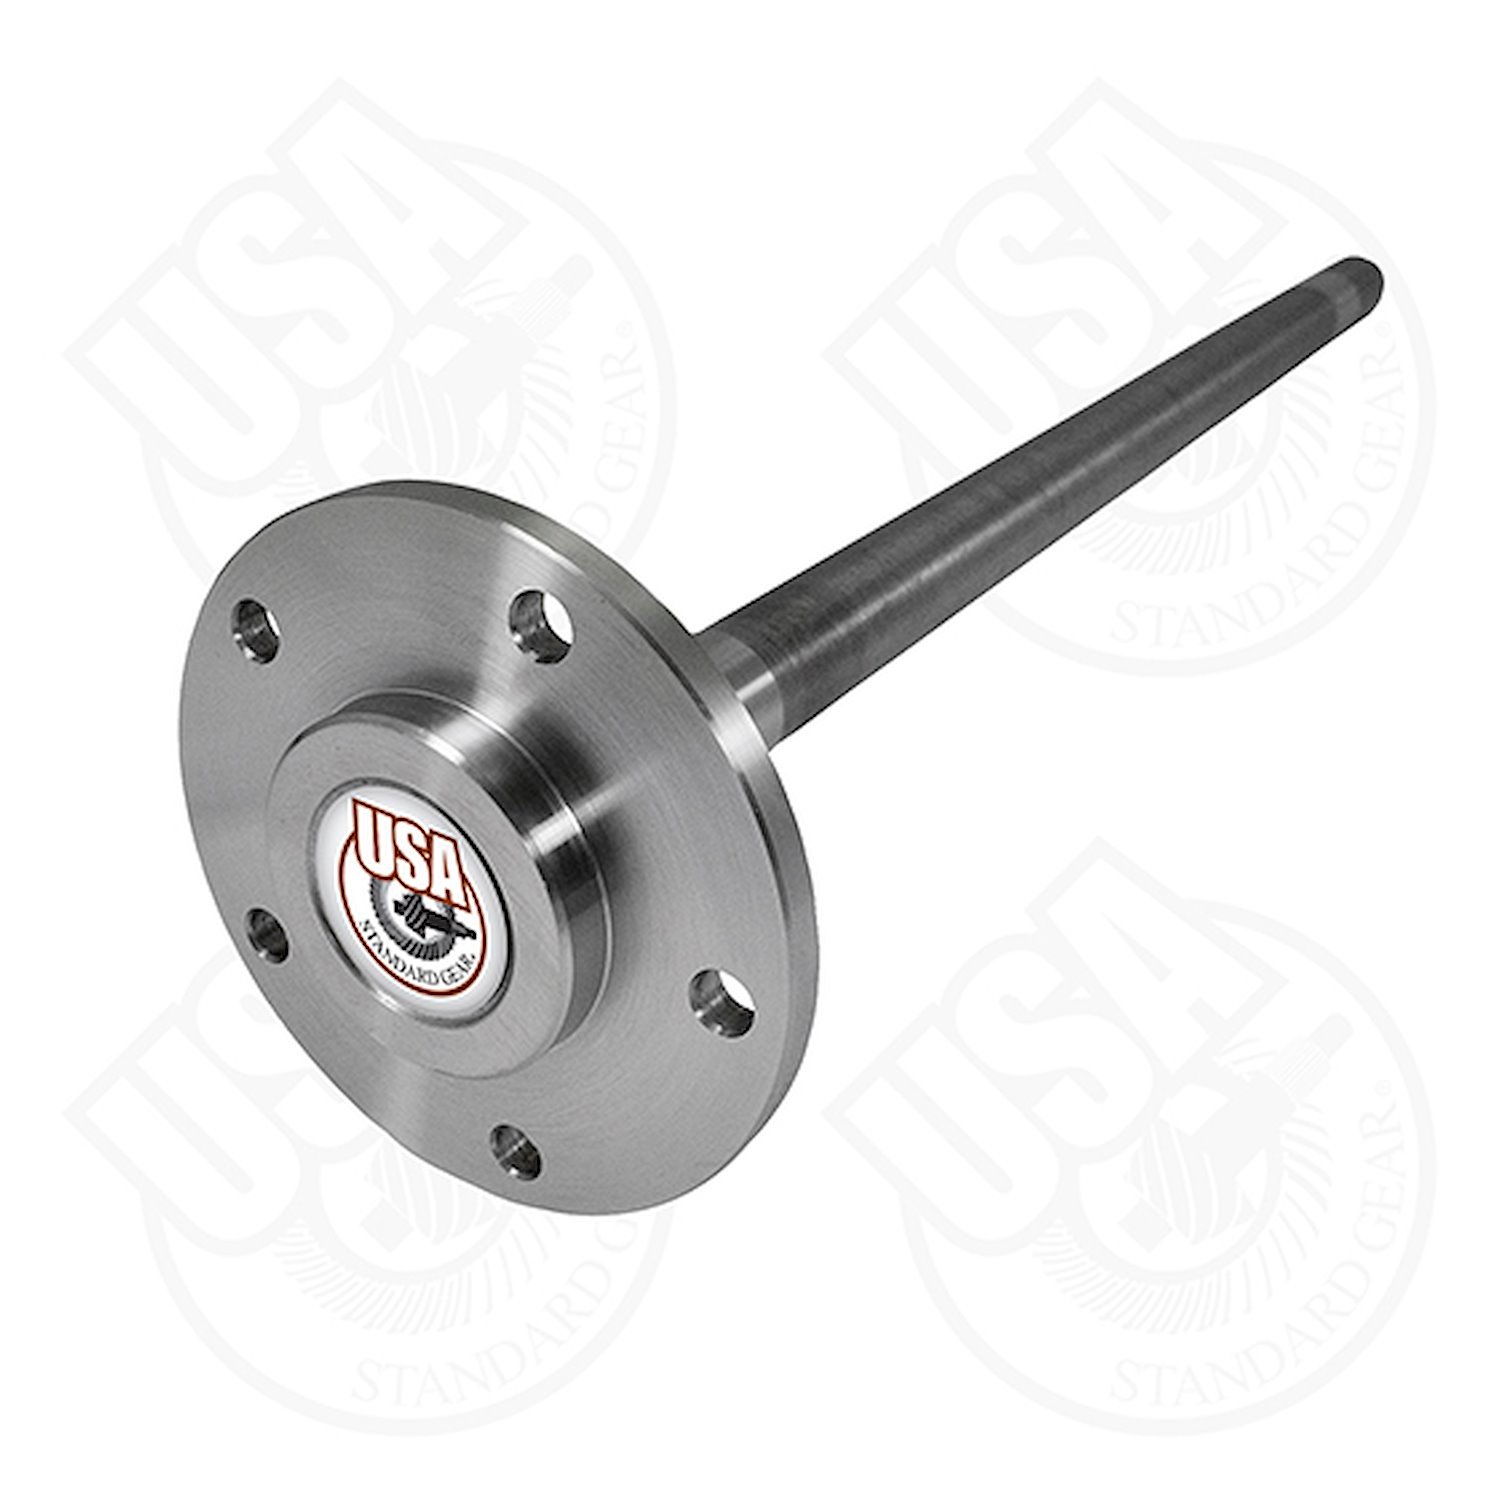 USA Standard axle for 96- 02 GM 1/2